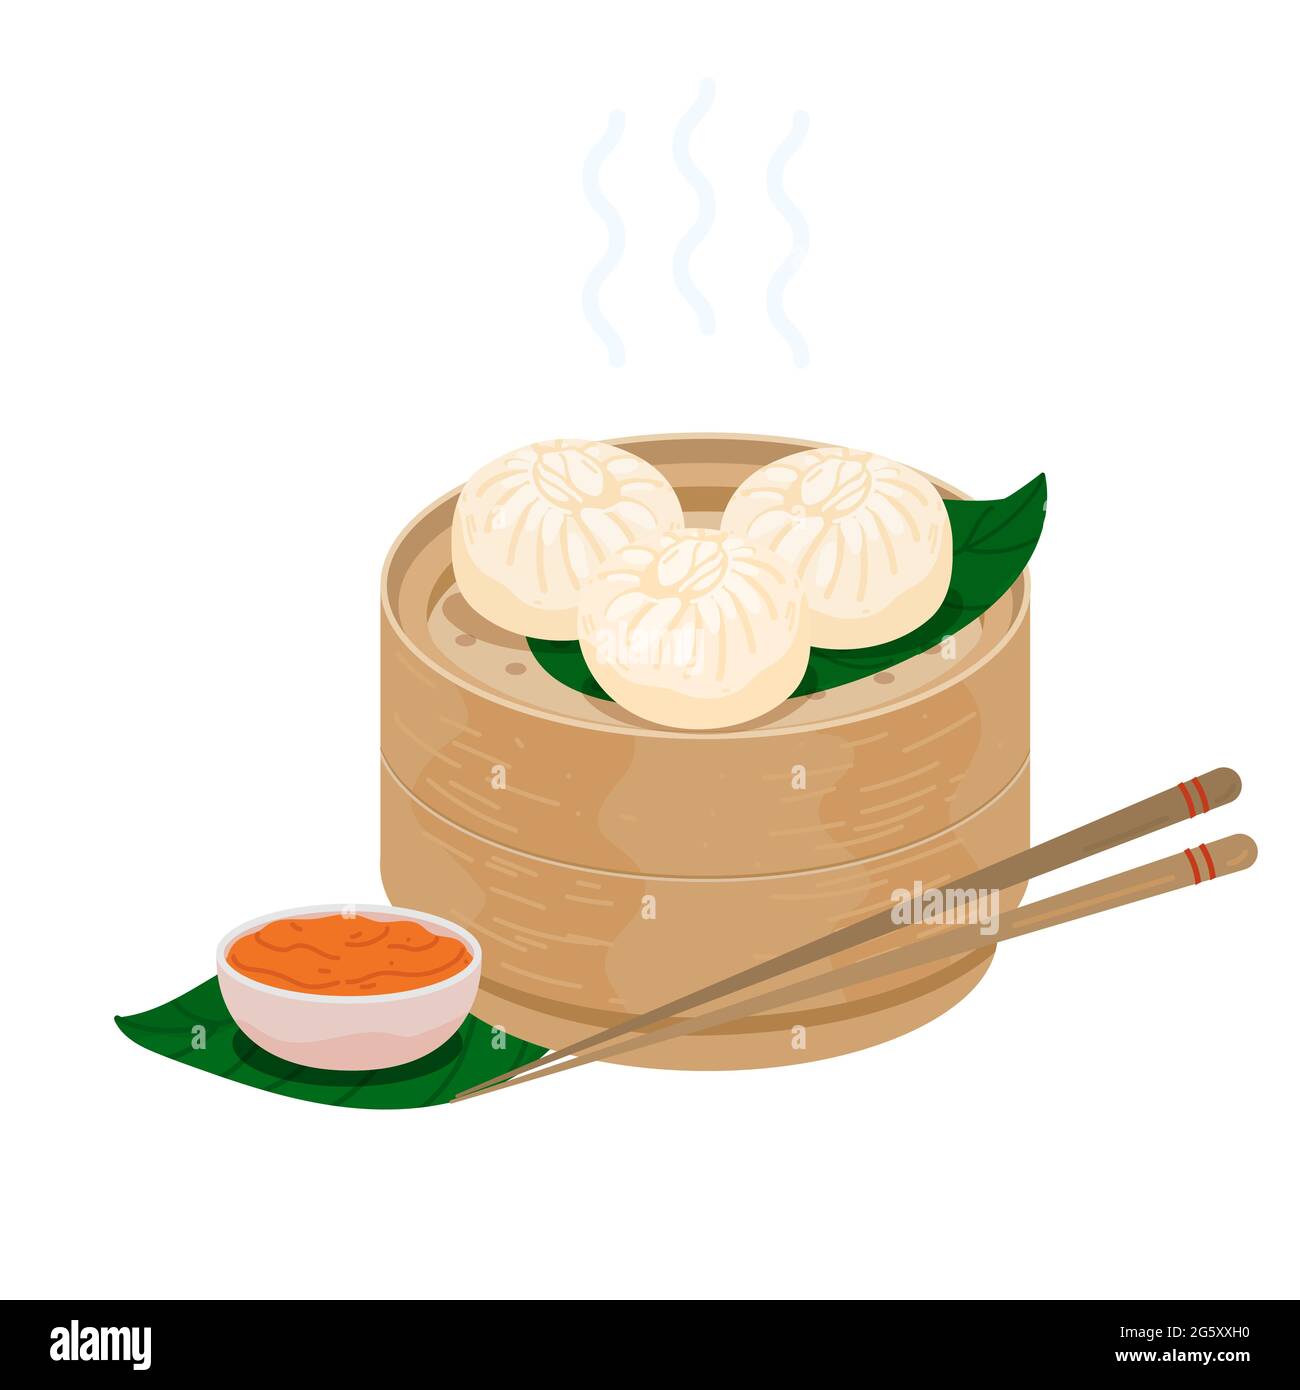 Baozi steamed chinese buns . Momo dumplings in a bamboo wooden steamer basket. Vector illustration of bao zi buns with sticks and chutney sauce. Icon Stock Vector